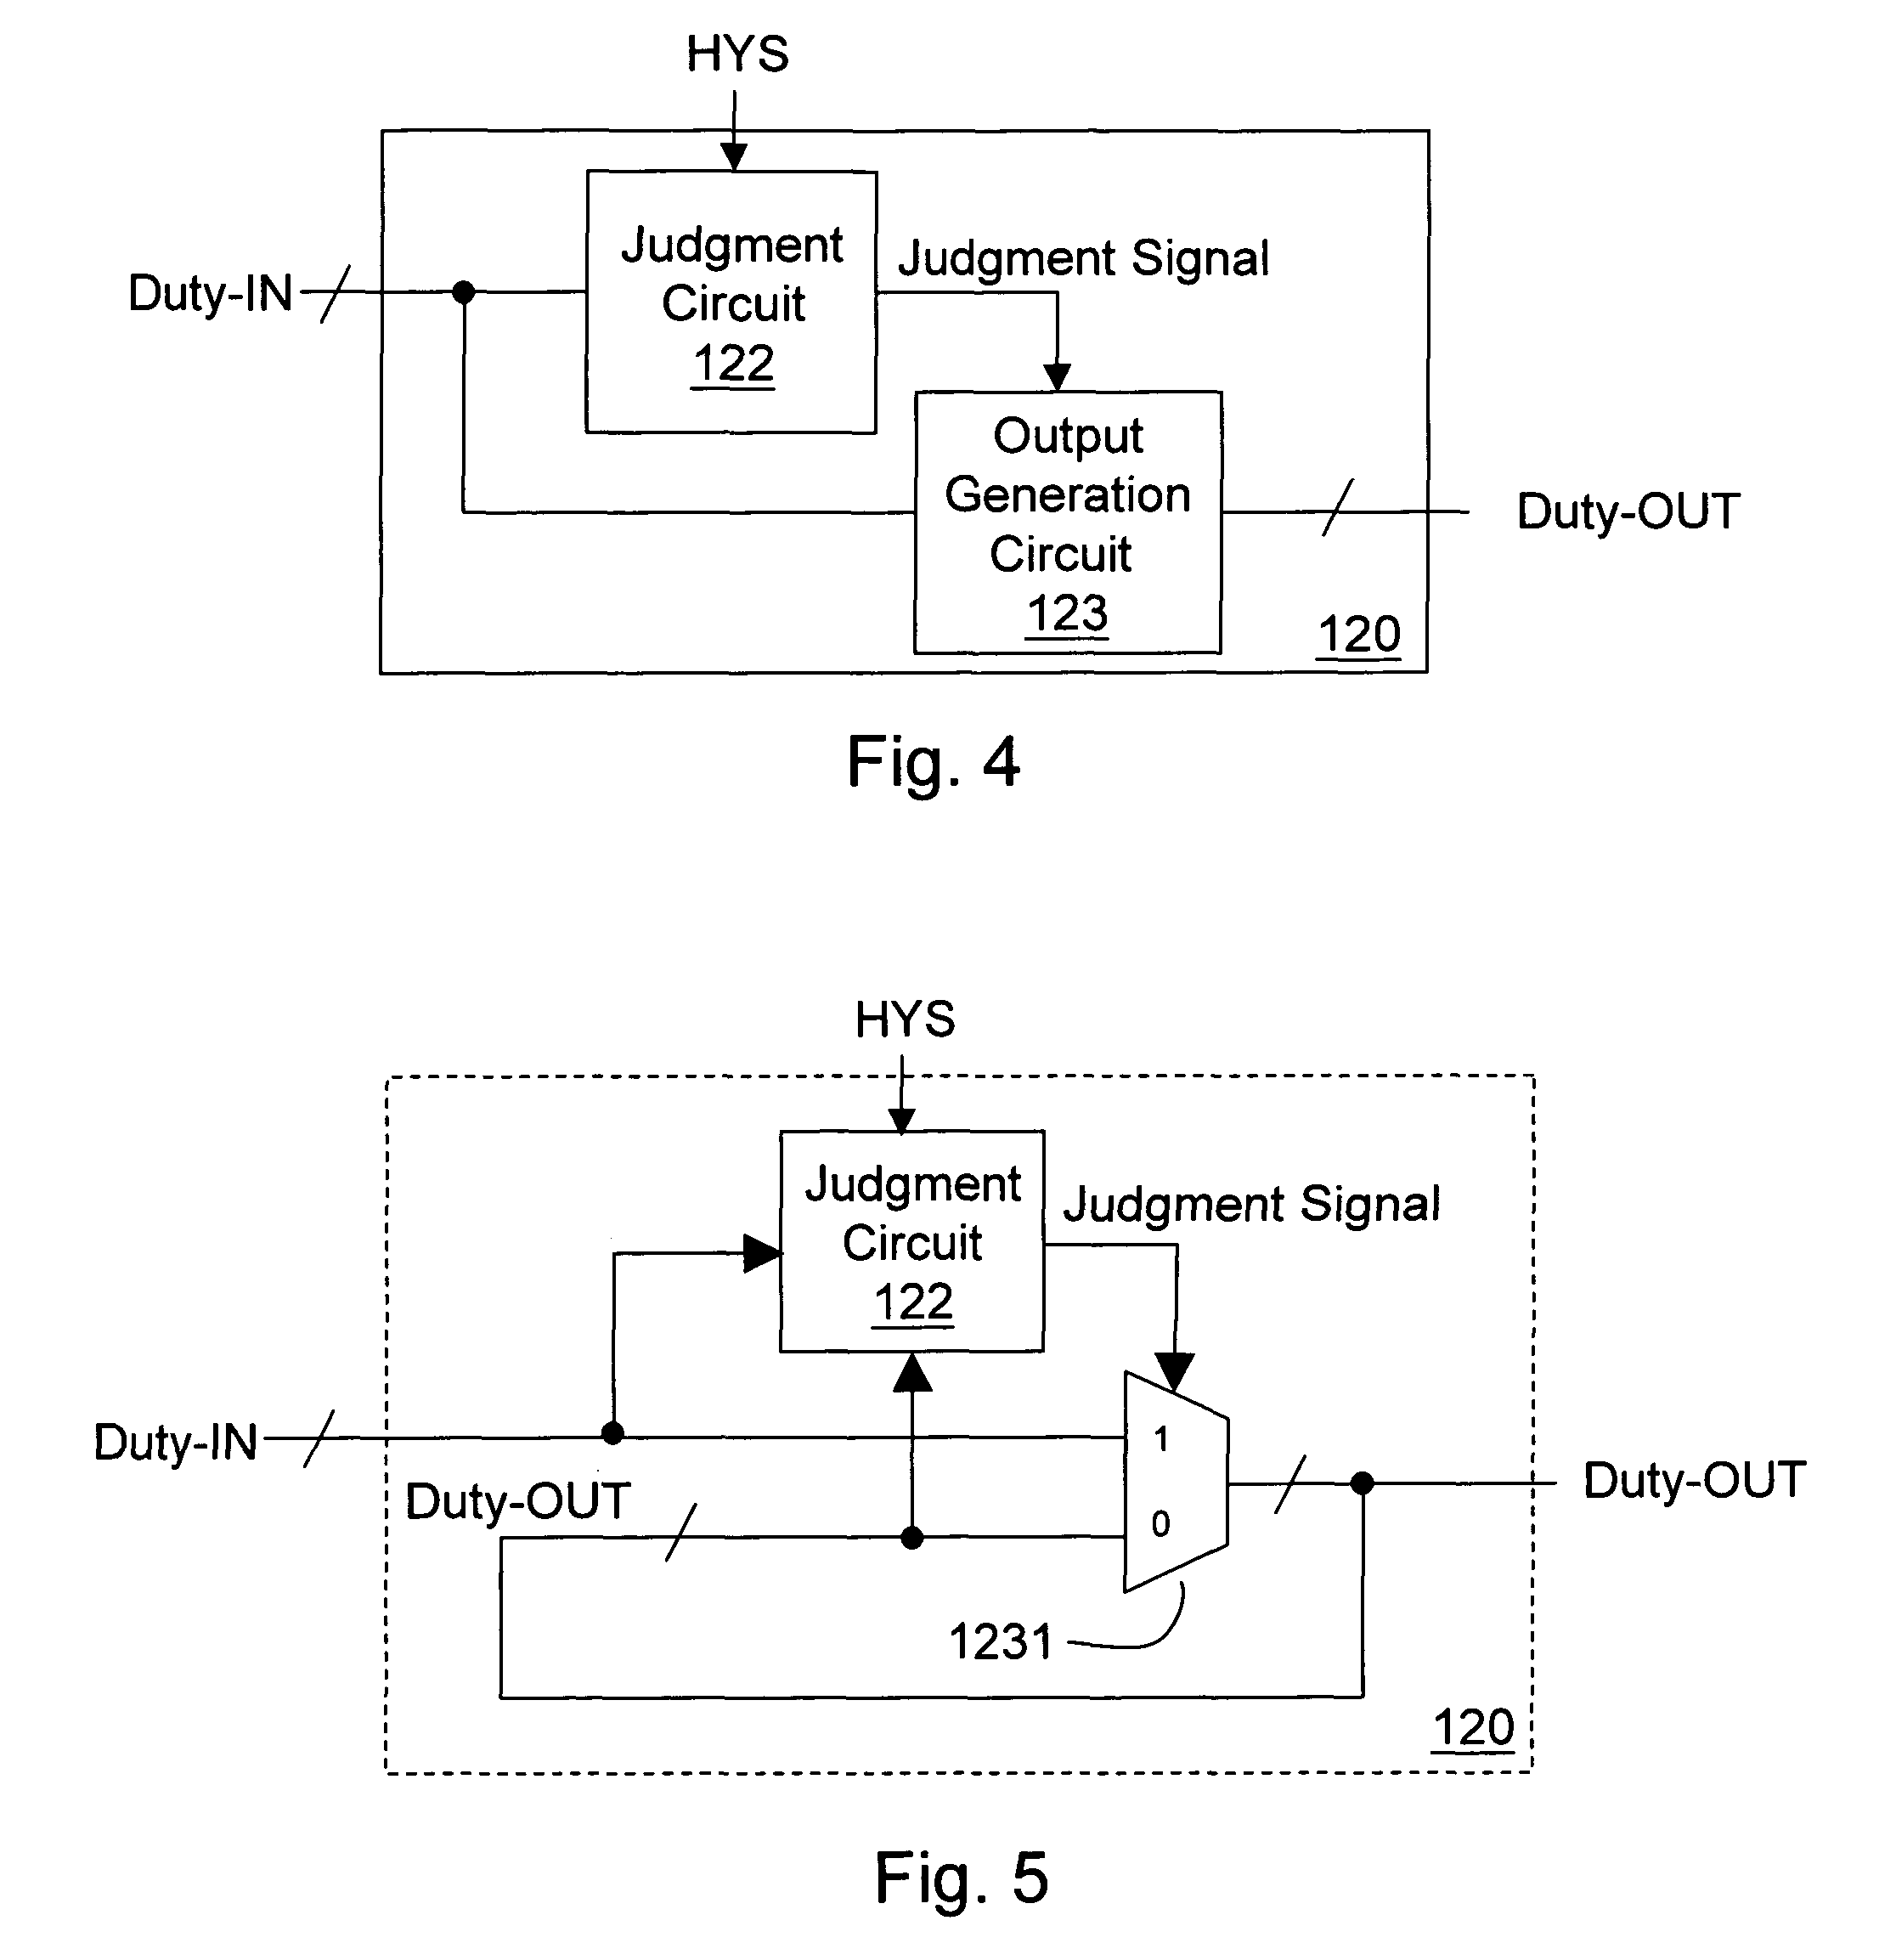 LED controller with de-flicker function and LED de-flicker circuit and method thereof